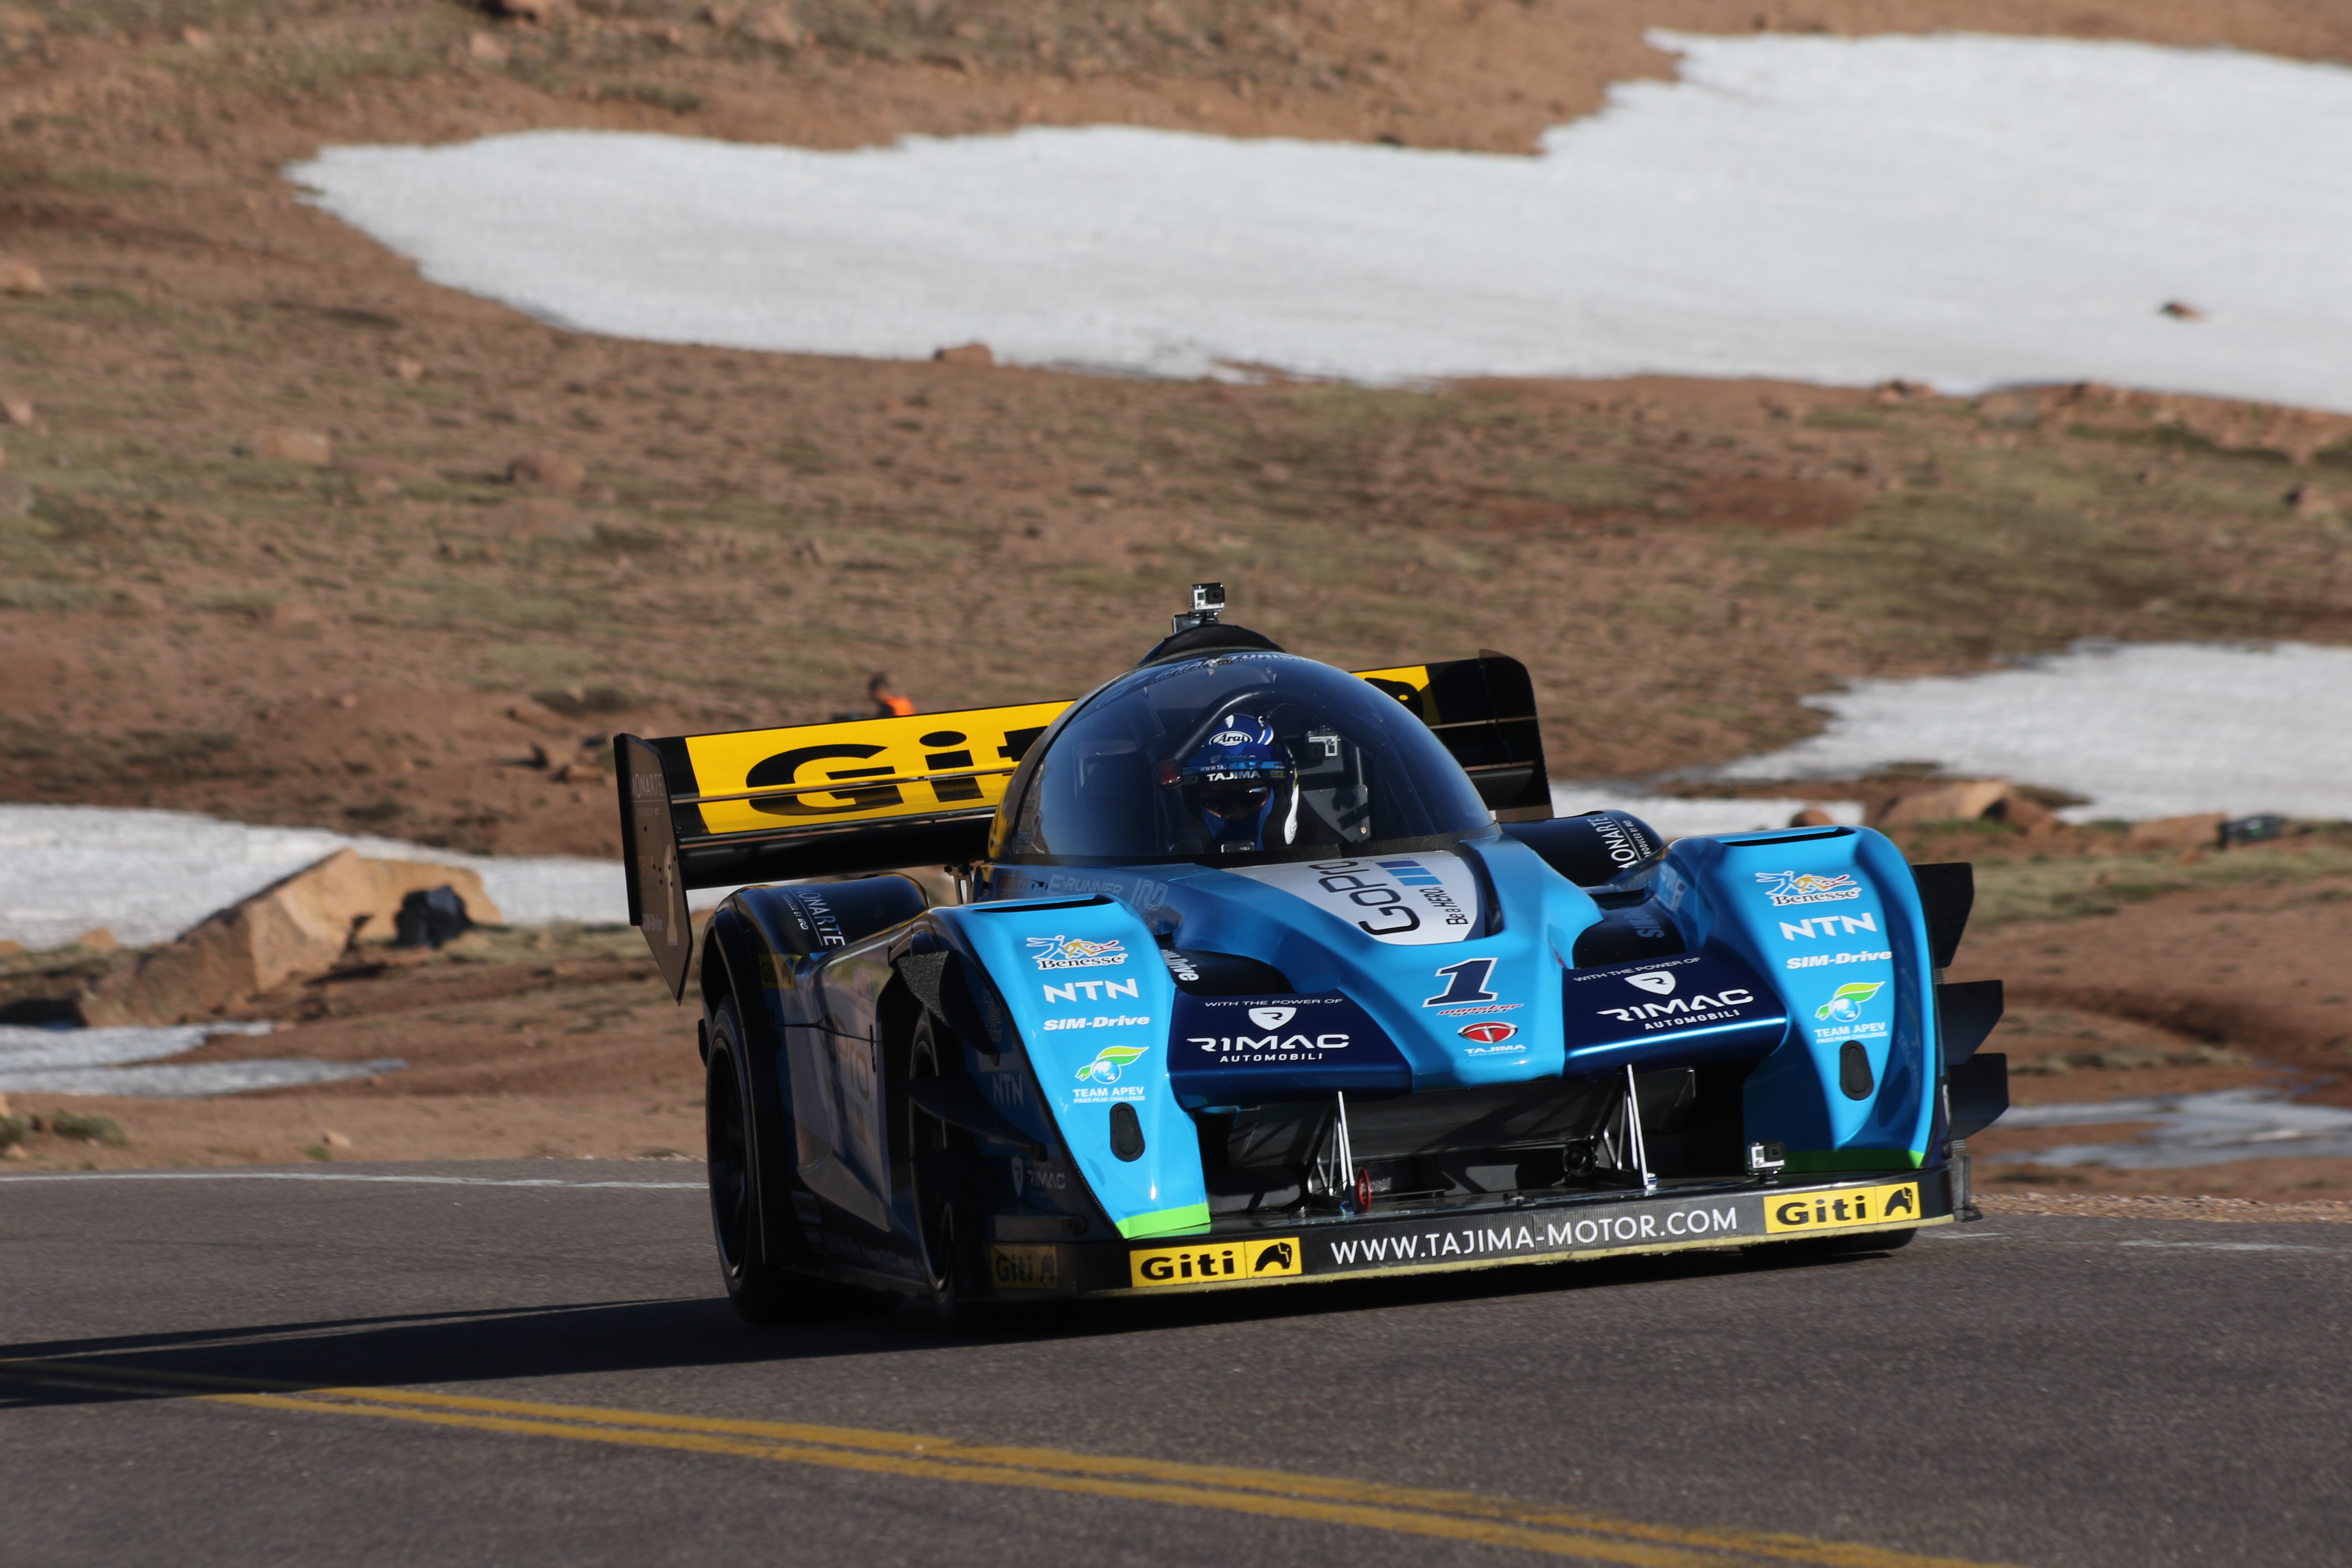 Nobuhiro “Monster” Tajima, shown here racing the Pike’s Peak Hillclimb in his custom-built, $5 million electric race car, will appear in the Maui Fair Parade and greet the public at the County Tent at the fair. Photo courtesy TEAM APEV.